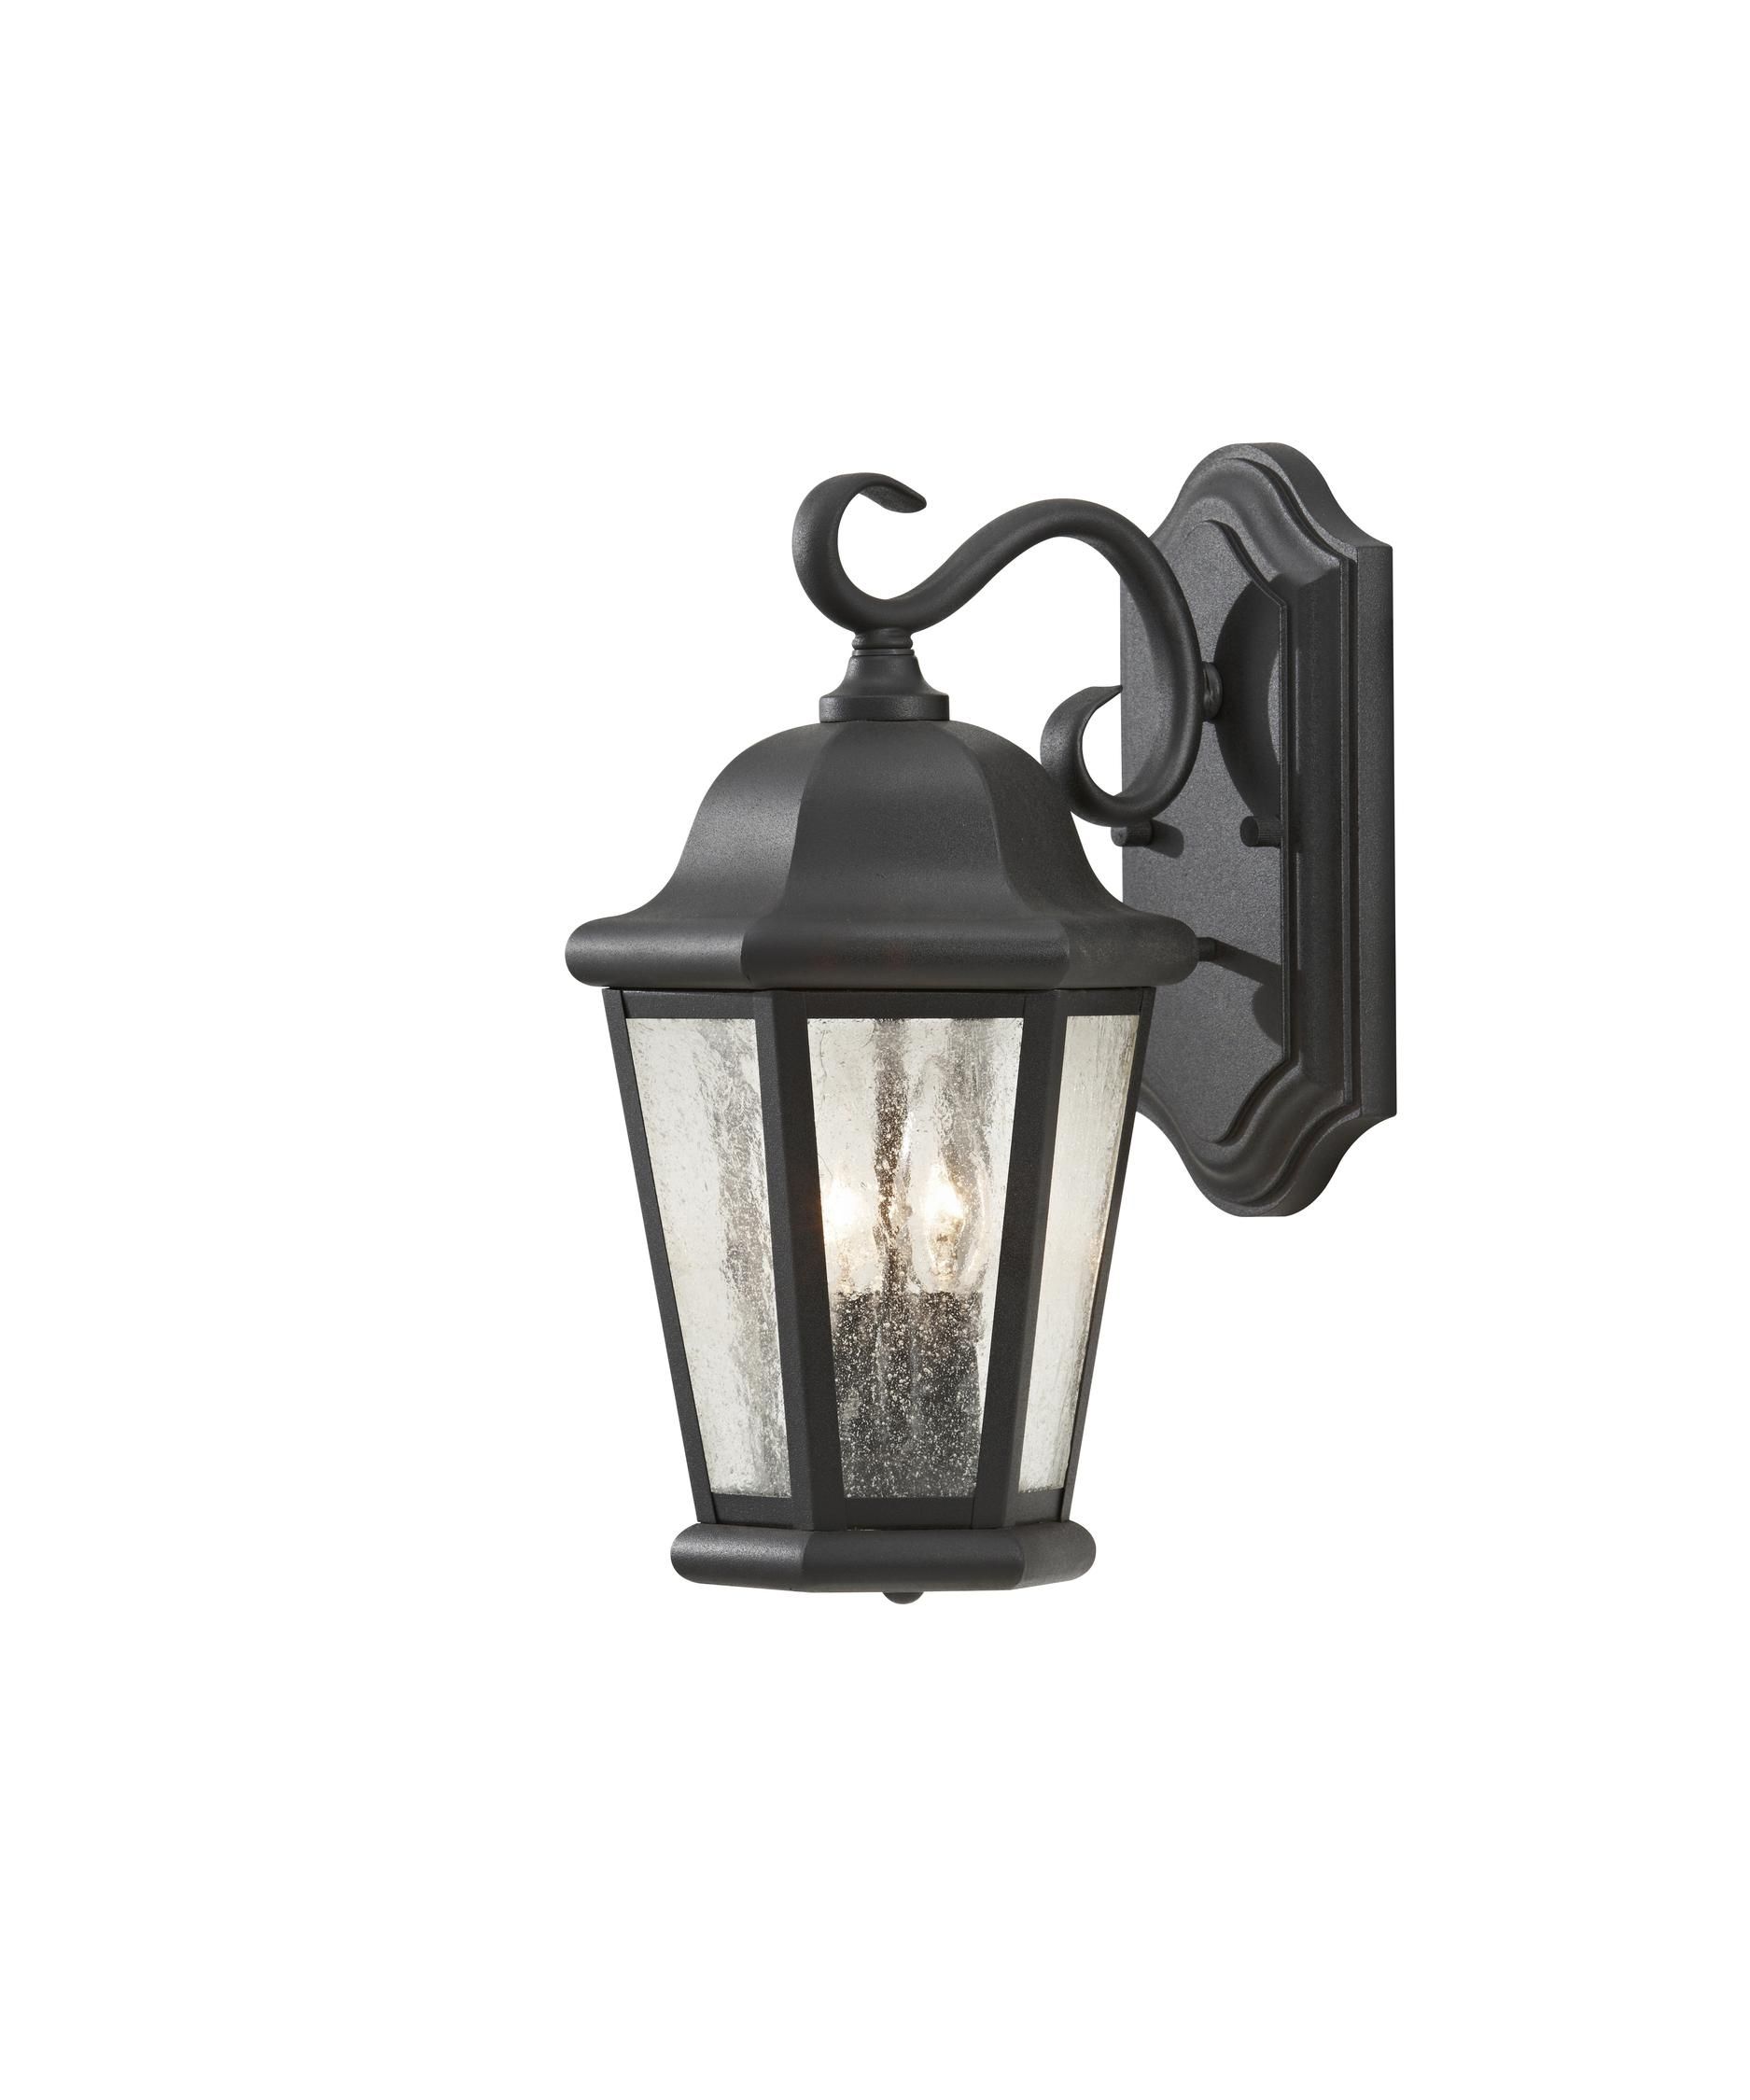 Murray Feiss Ol5901 Martinsville 15 Inch Wide 2 Light Outdoor Wall Intended For Outdoor Wall Lighting With Seeded Glass (View 4 of 15)